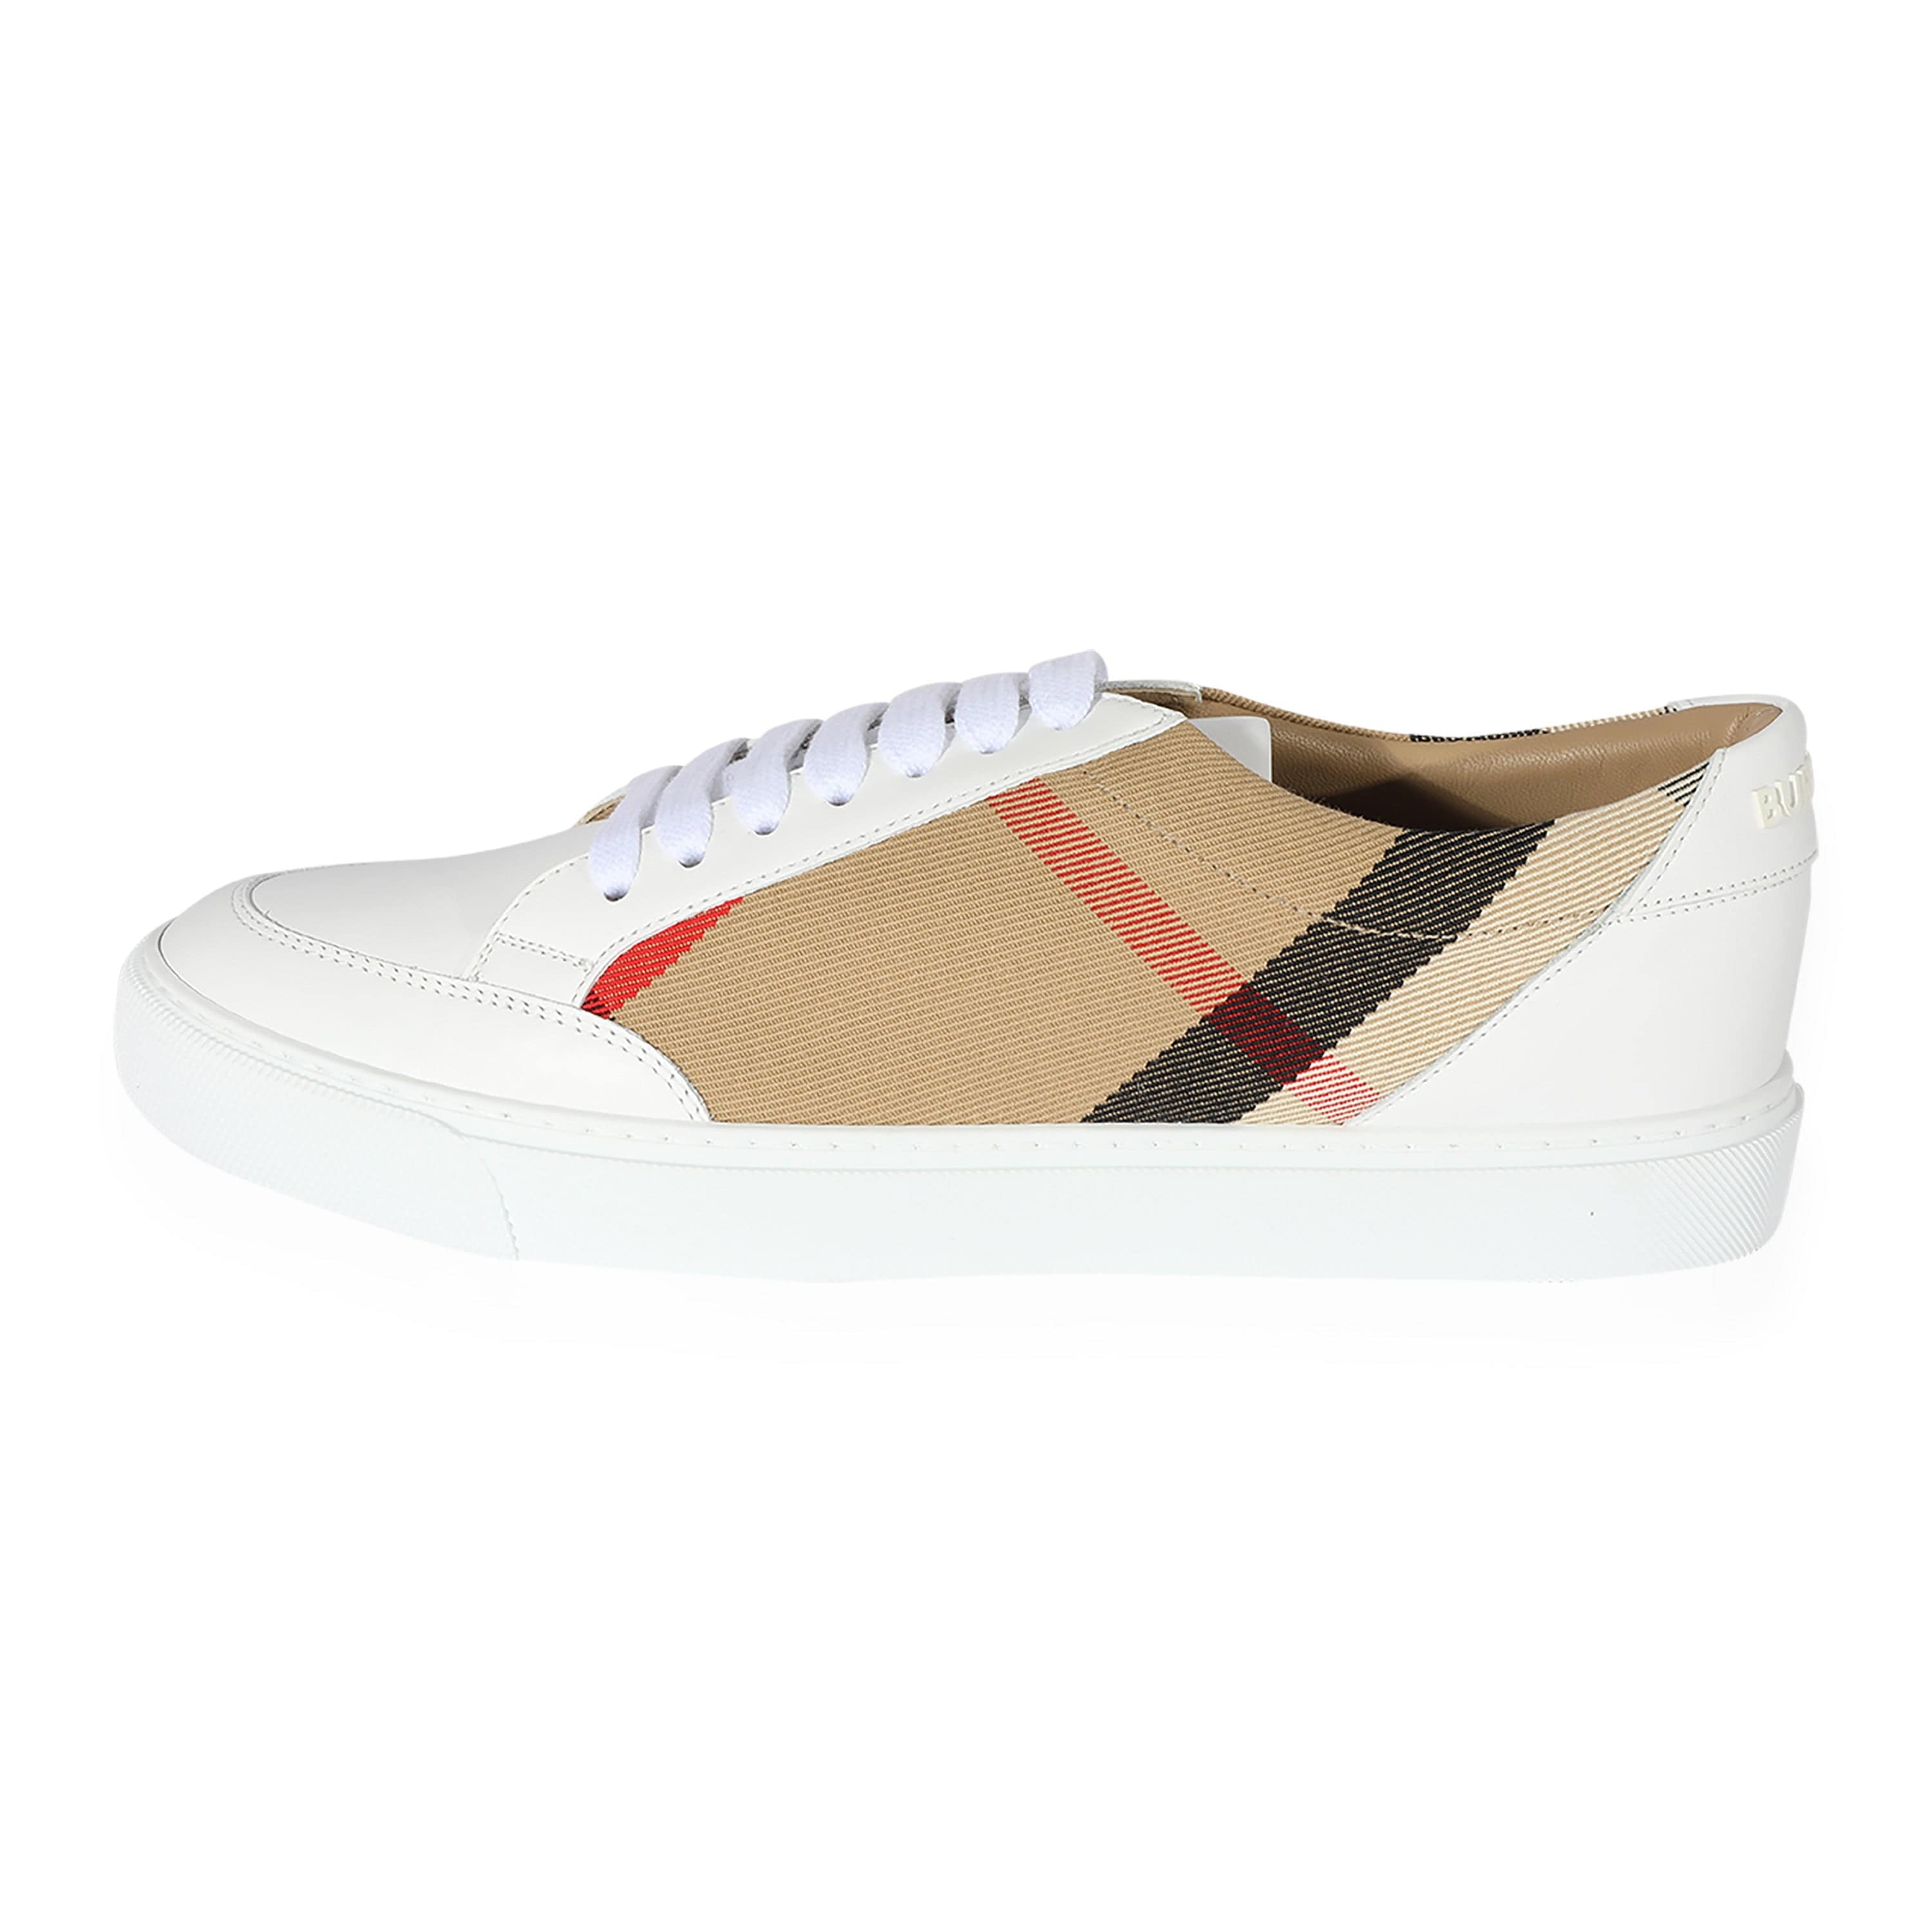 Burberry Burberry House Check & Leather 'Optic White'